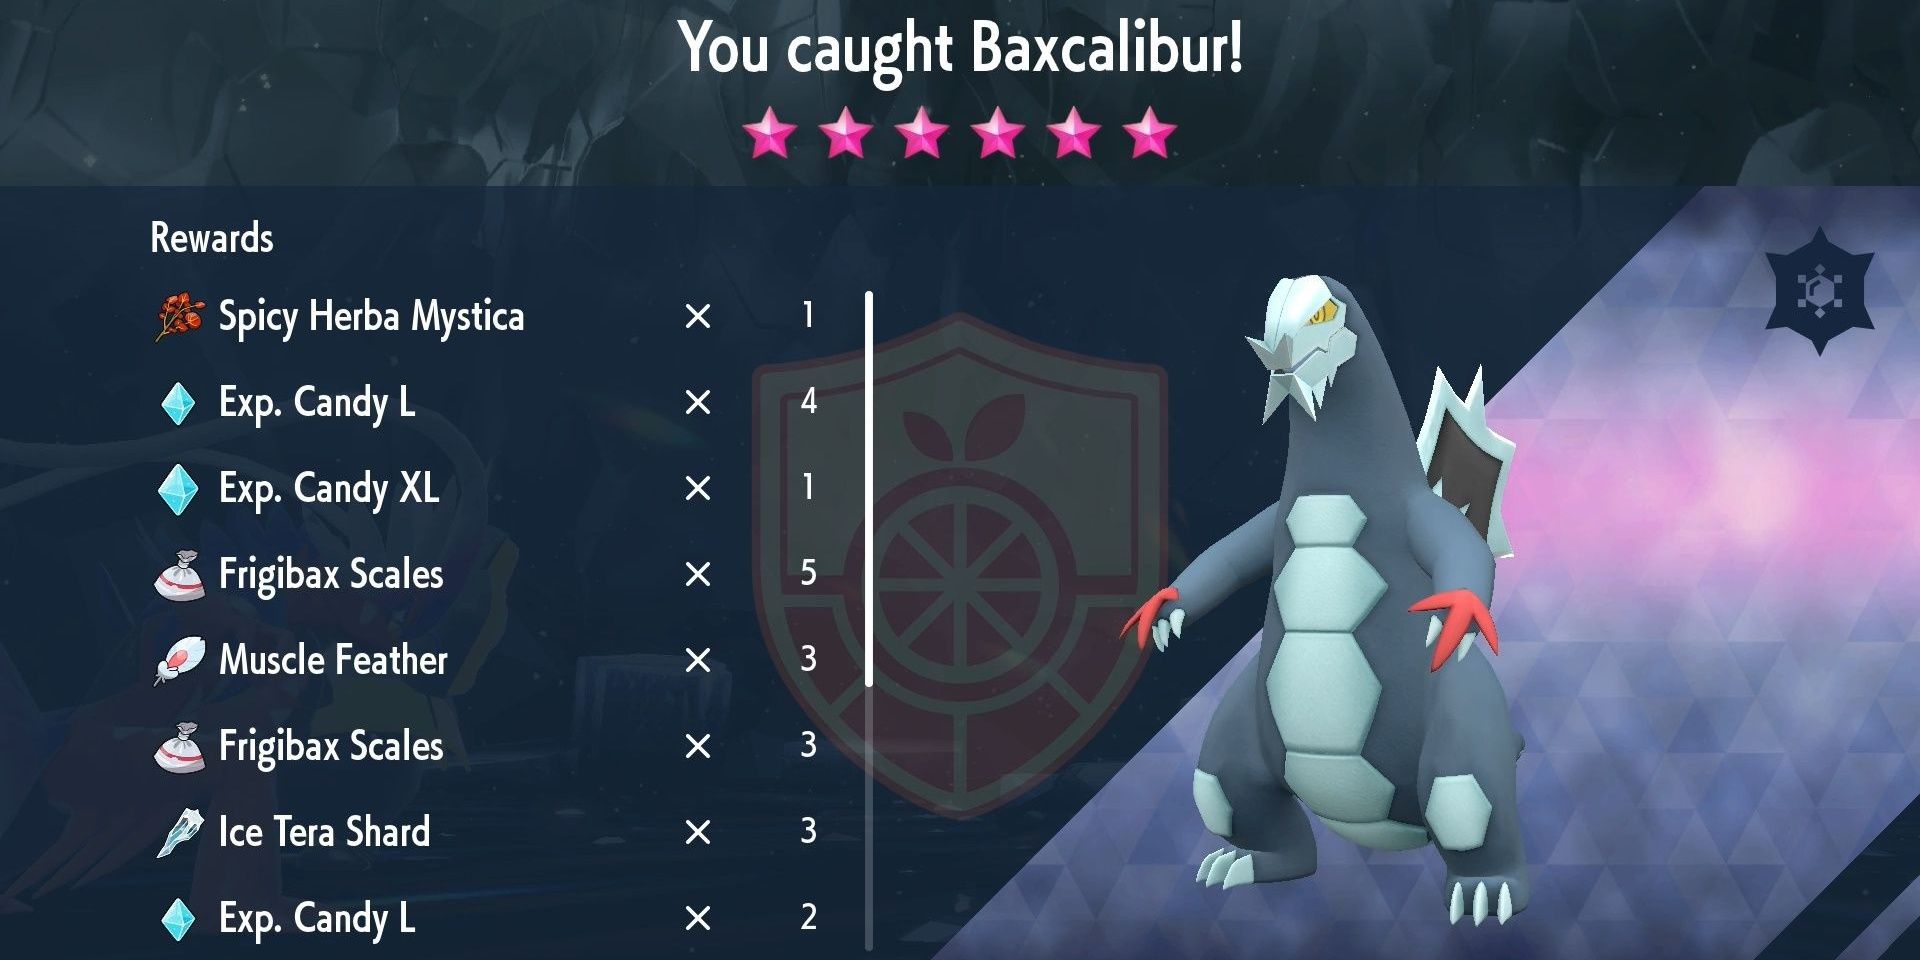 The rewards received for completing a 6-star Baxcalibur Tera raid in Pokemon Scarlet & Violet.